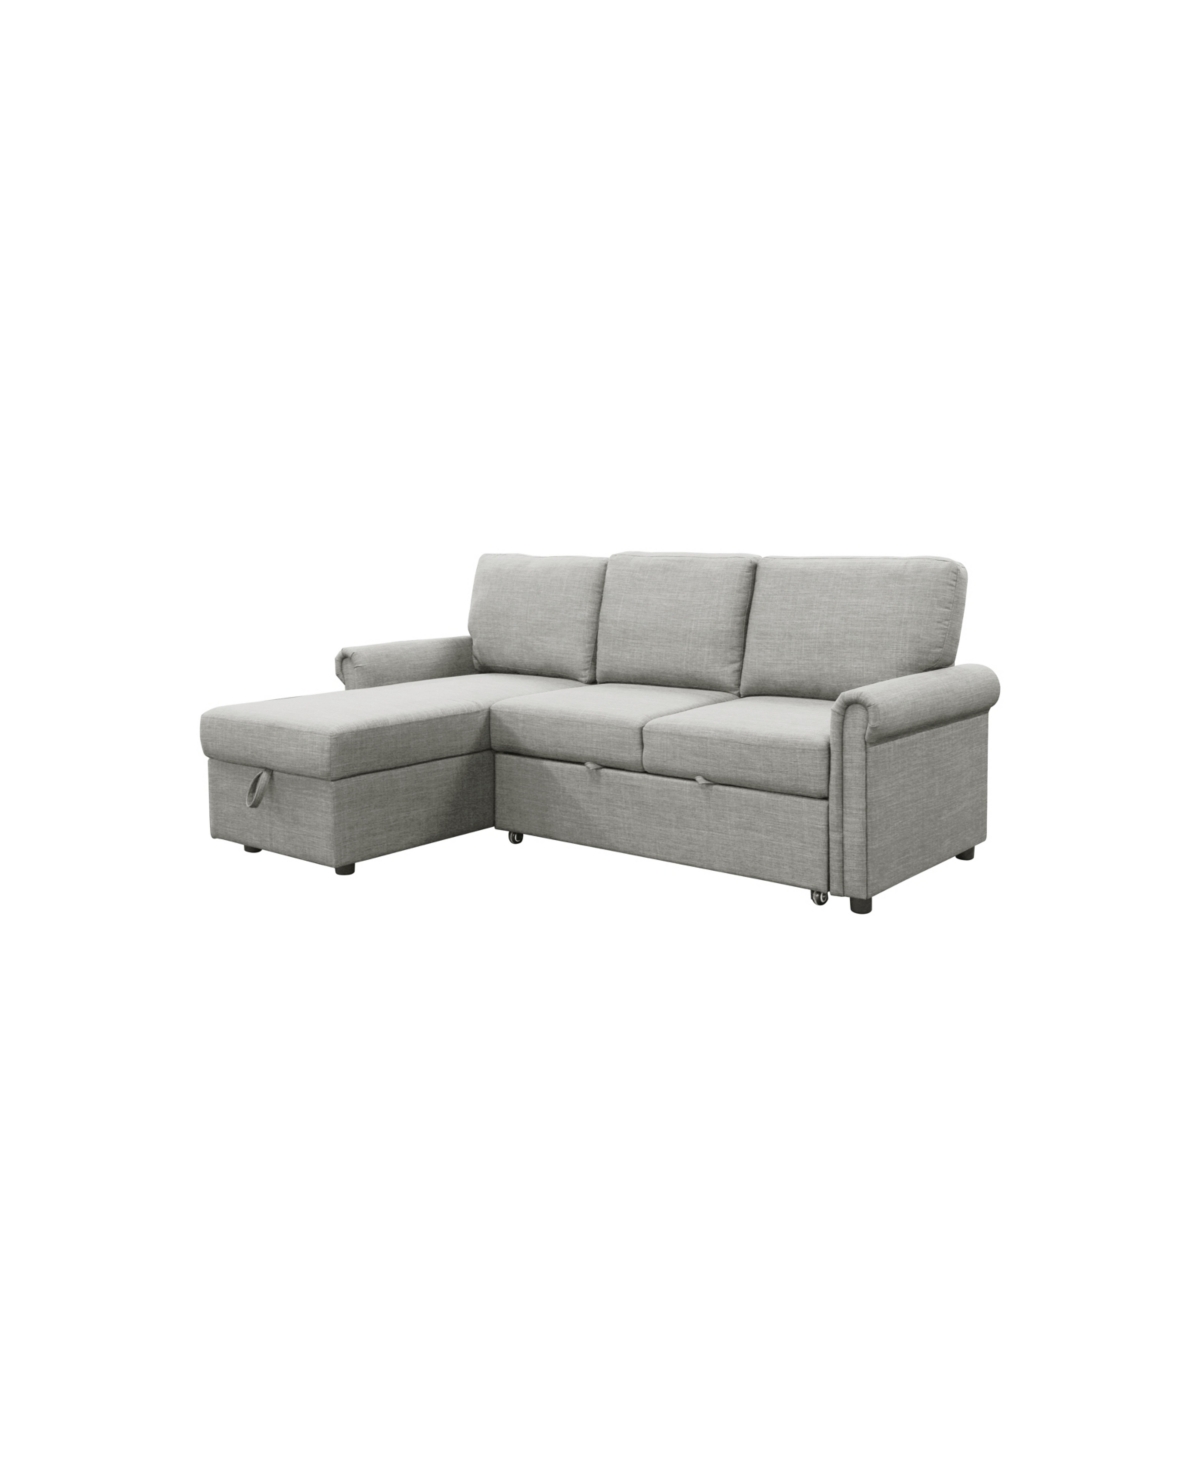 Abbyson Living Hamilton 2 Piece Storage Sofa Bed Reversible Sectional In Light Gray